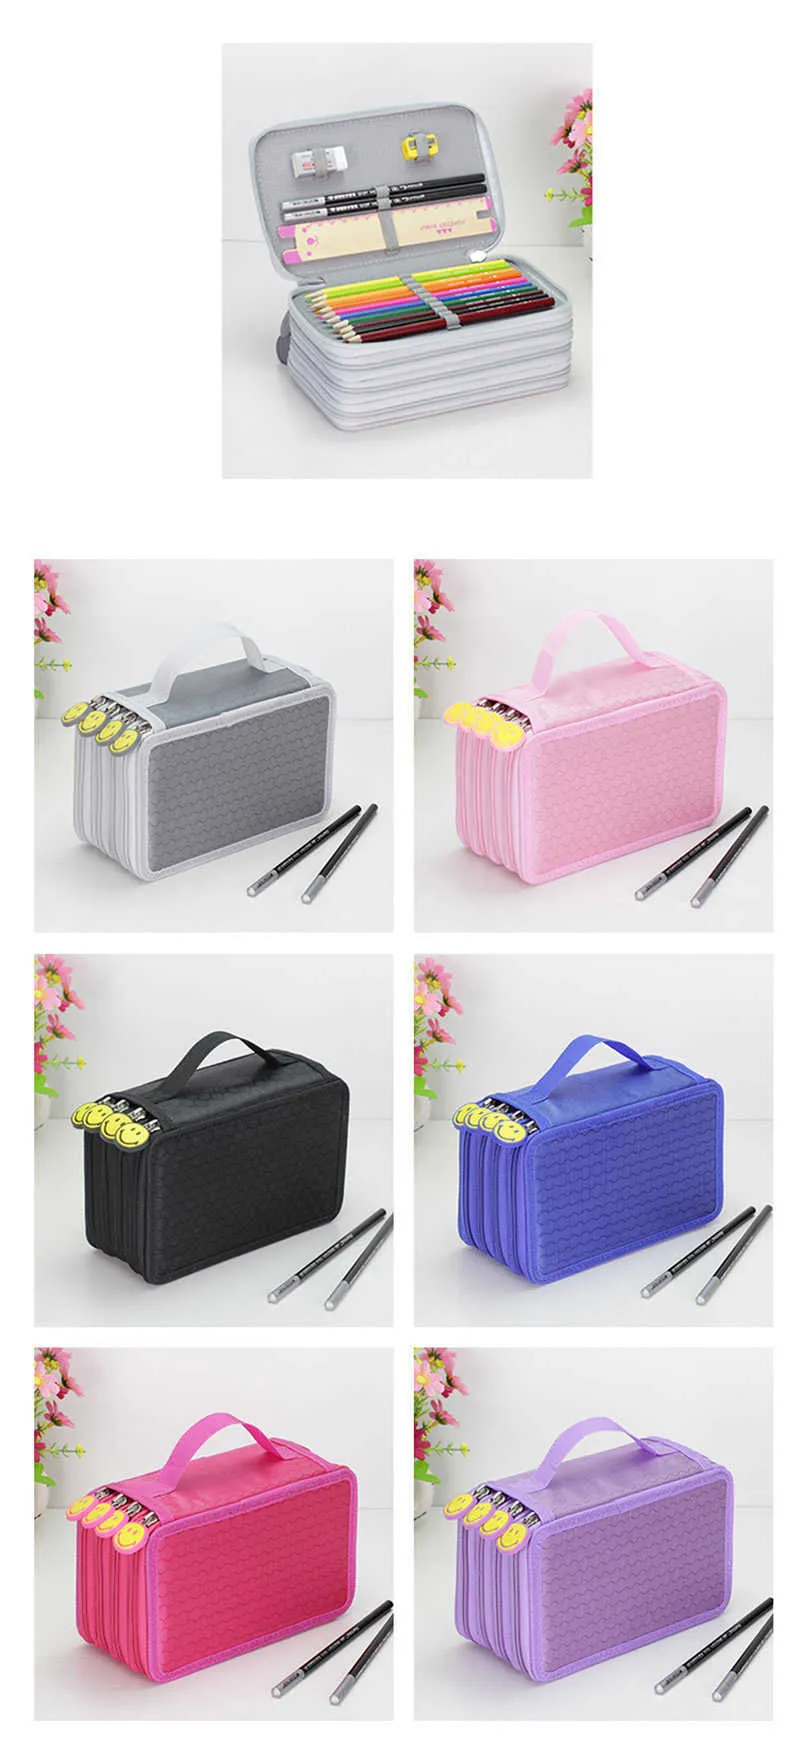 Wholesale Large Capacity Cheap Pencil Cases Bulk With Zipper Pouch 32/52/72  Slots For School Stationery Organization HKD230831 From Flying_king18,  $11.71